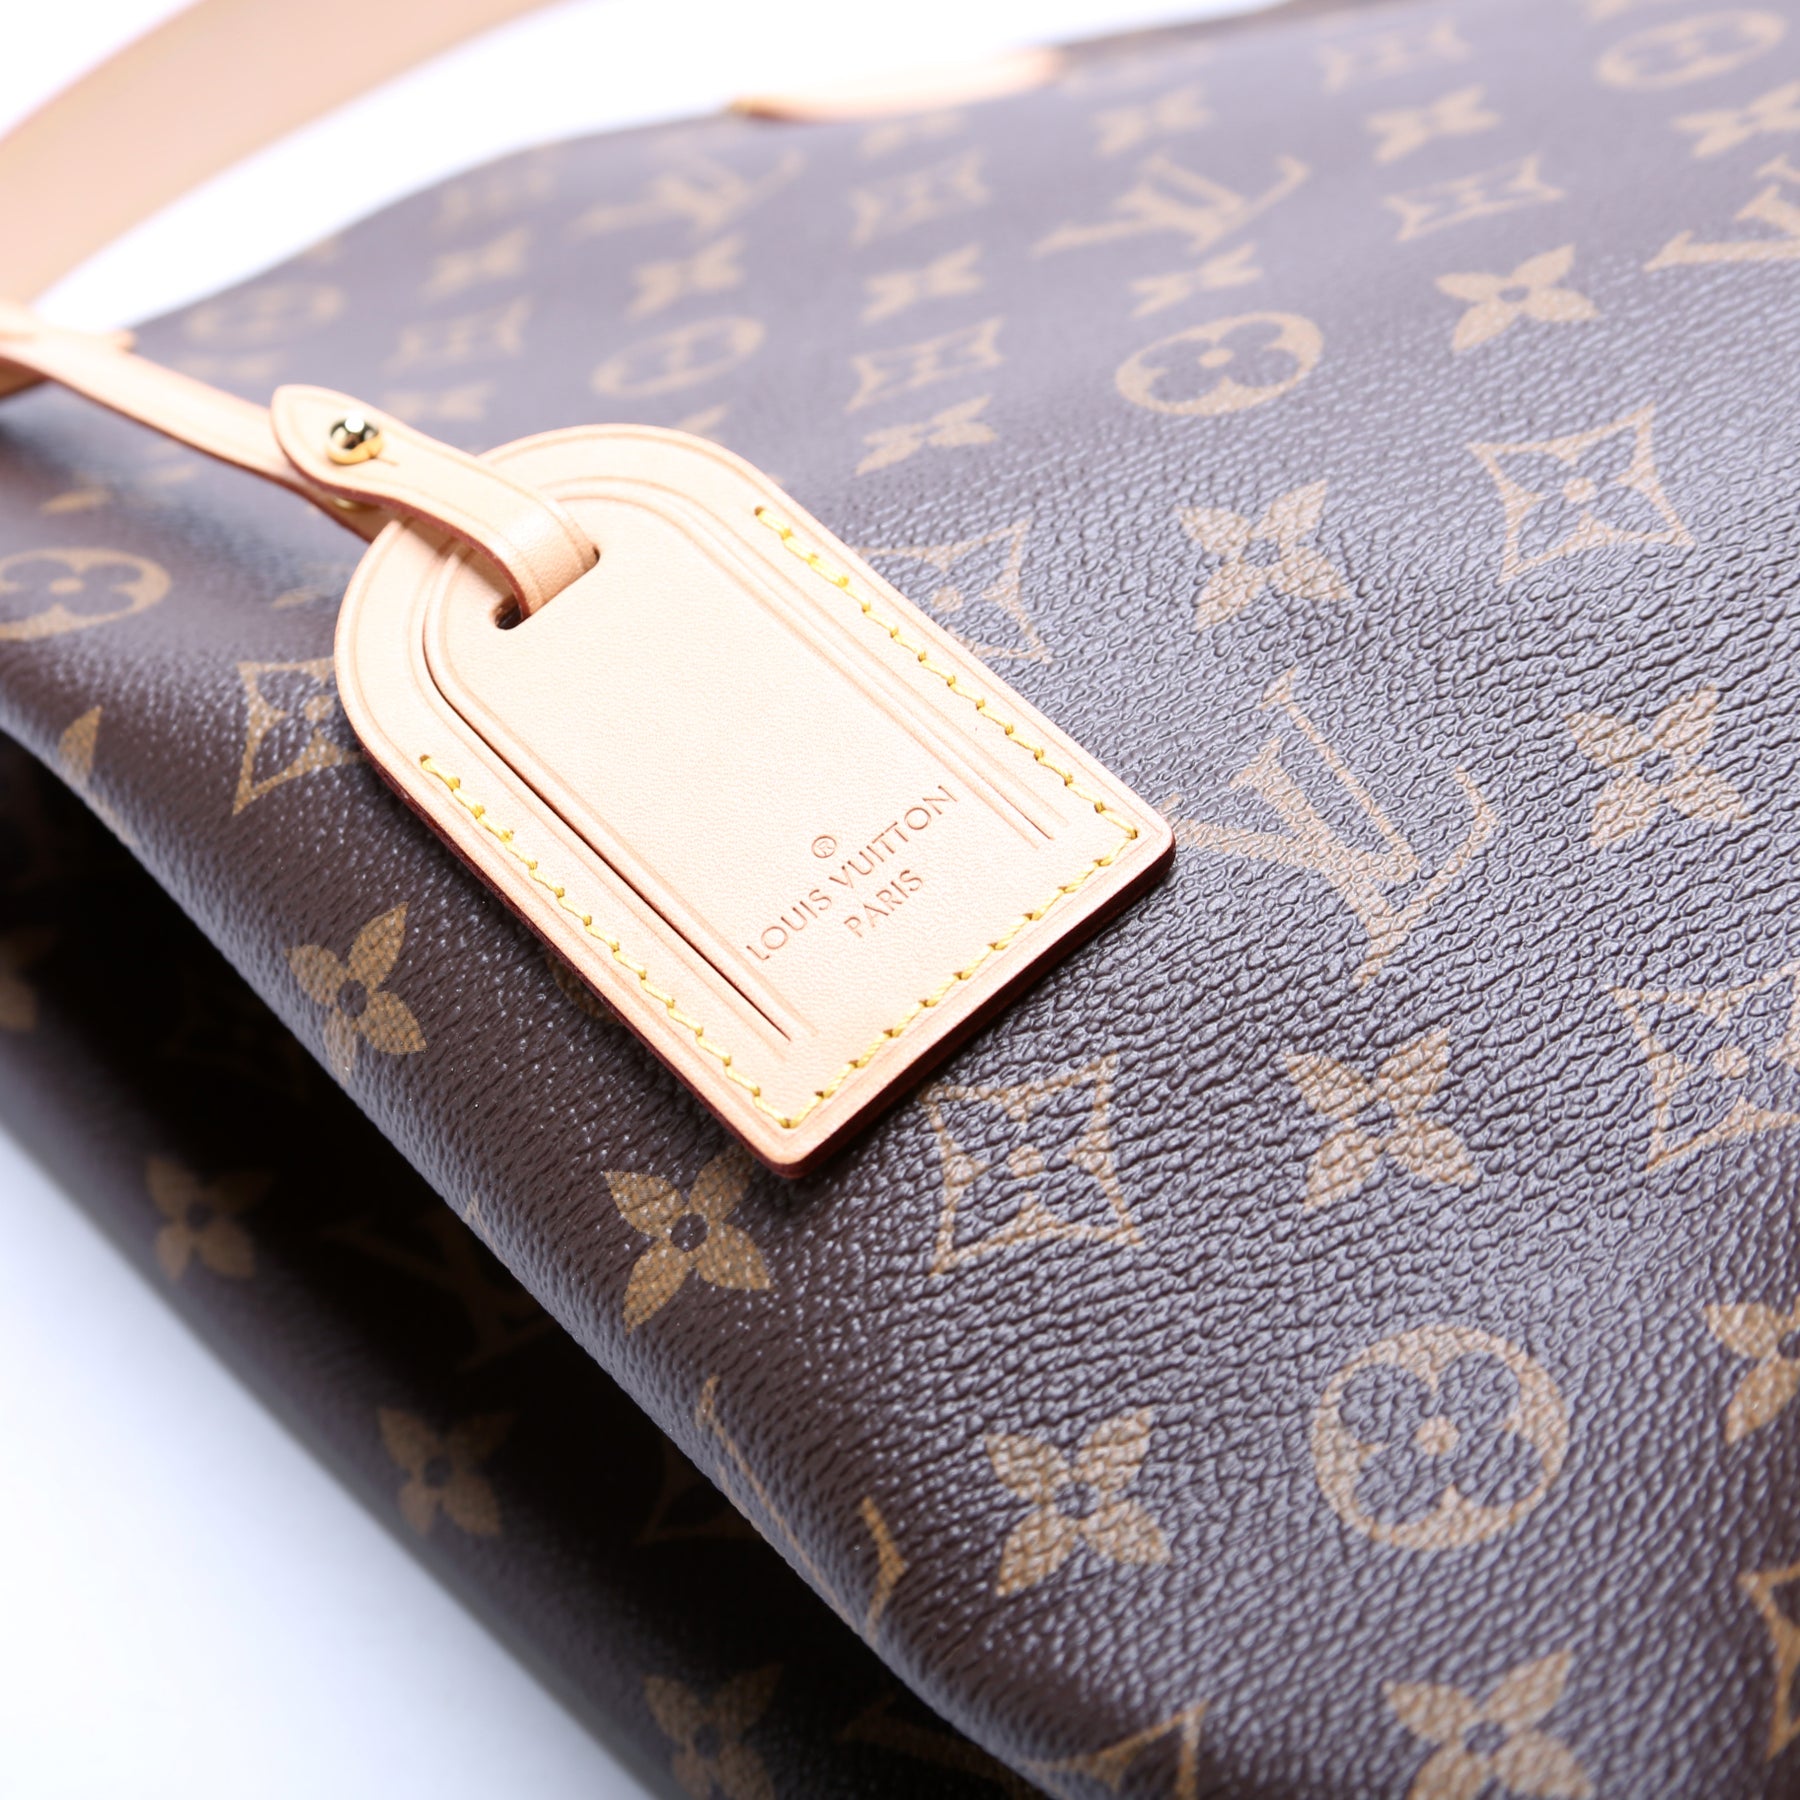 Louis Vuitton Graceful MM Monogram Tote - A World Of Goods For You, LLC